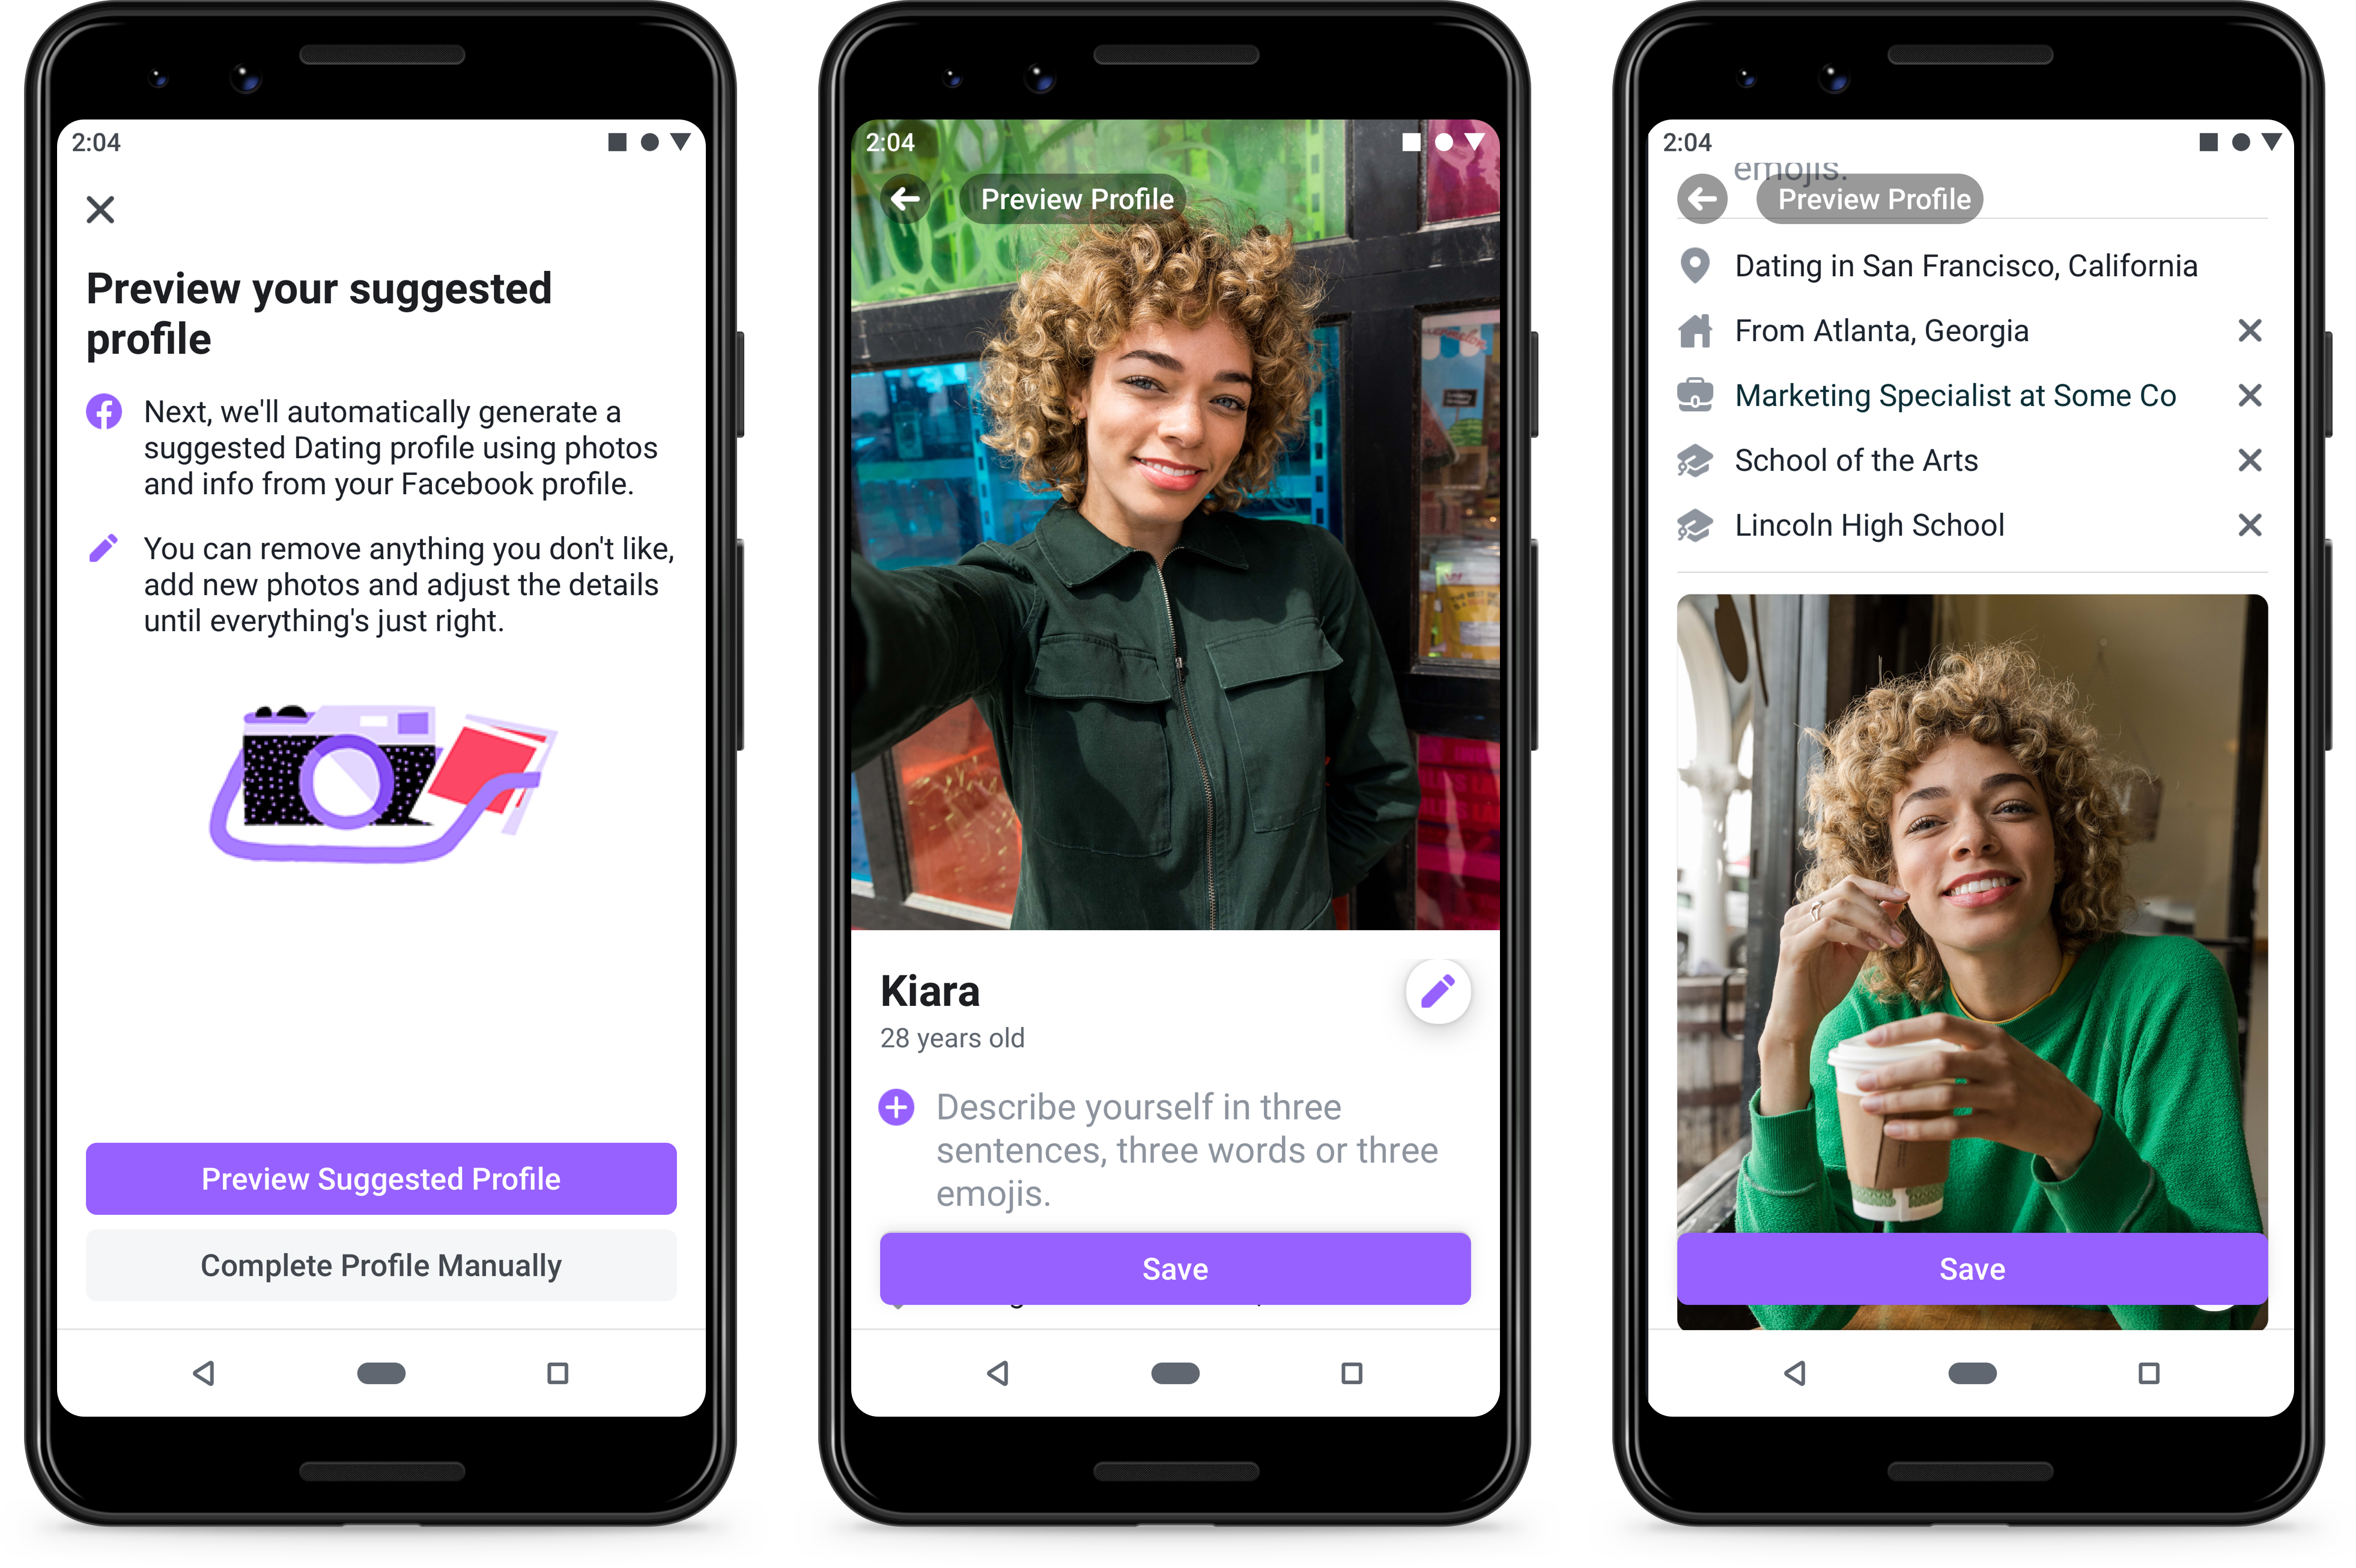 What To Know About Facebook’s New ‘Facebook Dating’ Platform